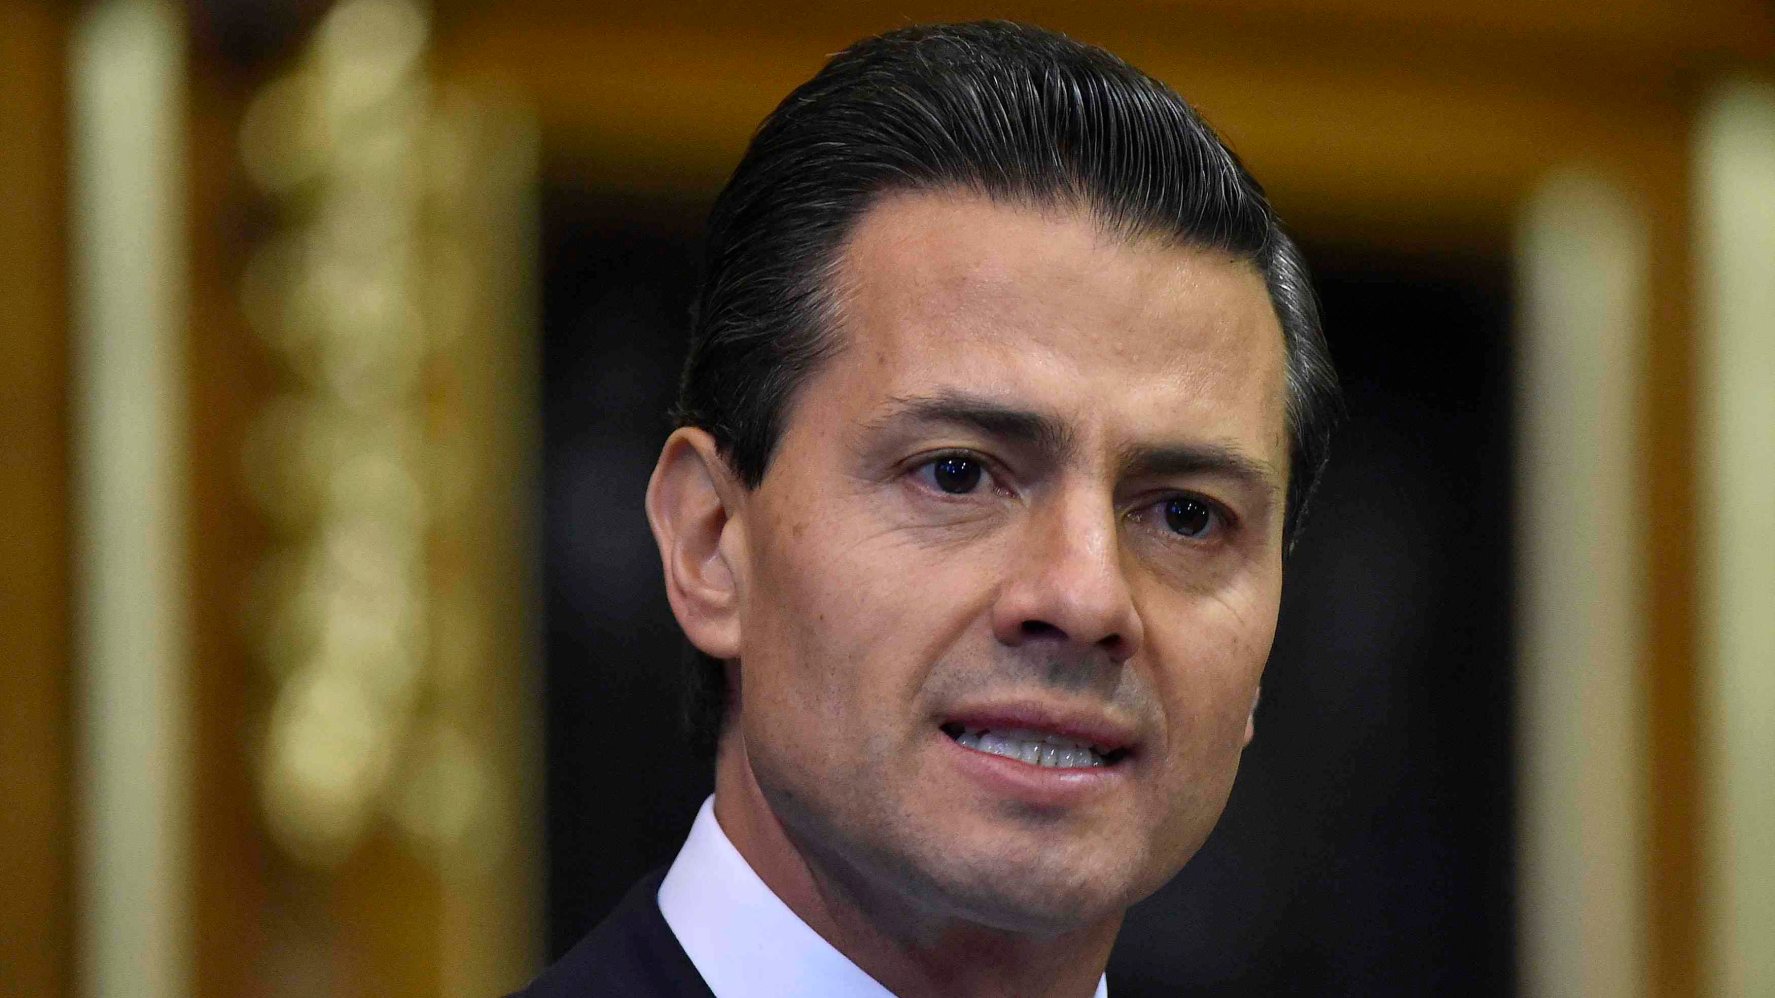 Concern Grows as Mexico President Talks of Investigation NBC 6 South